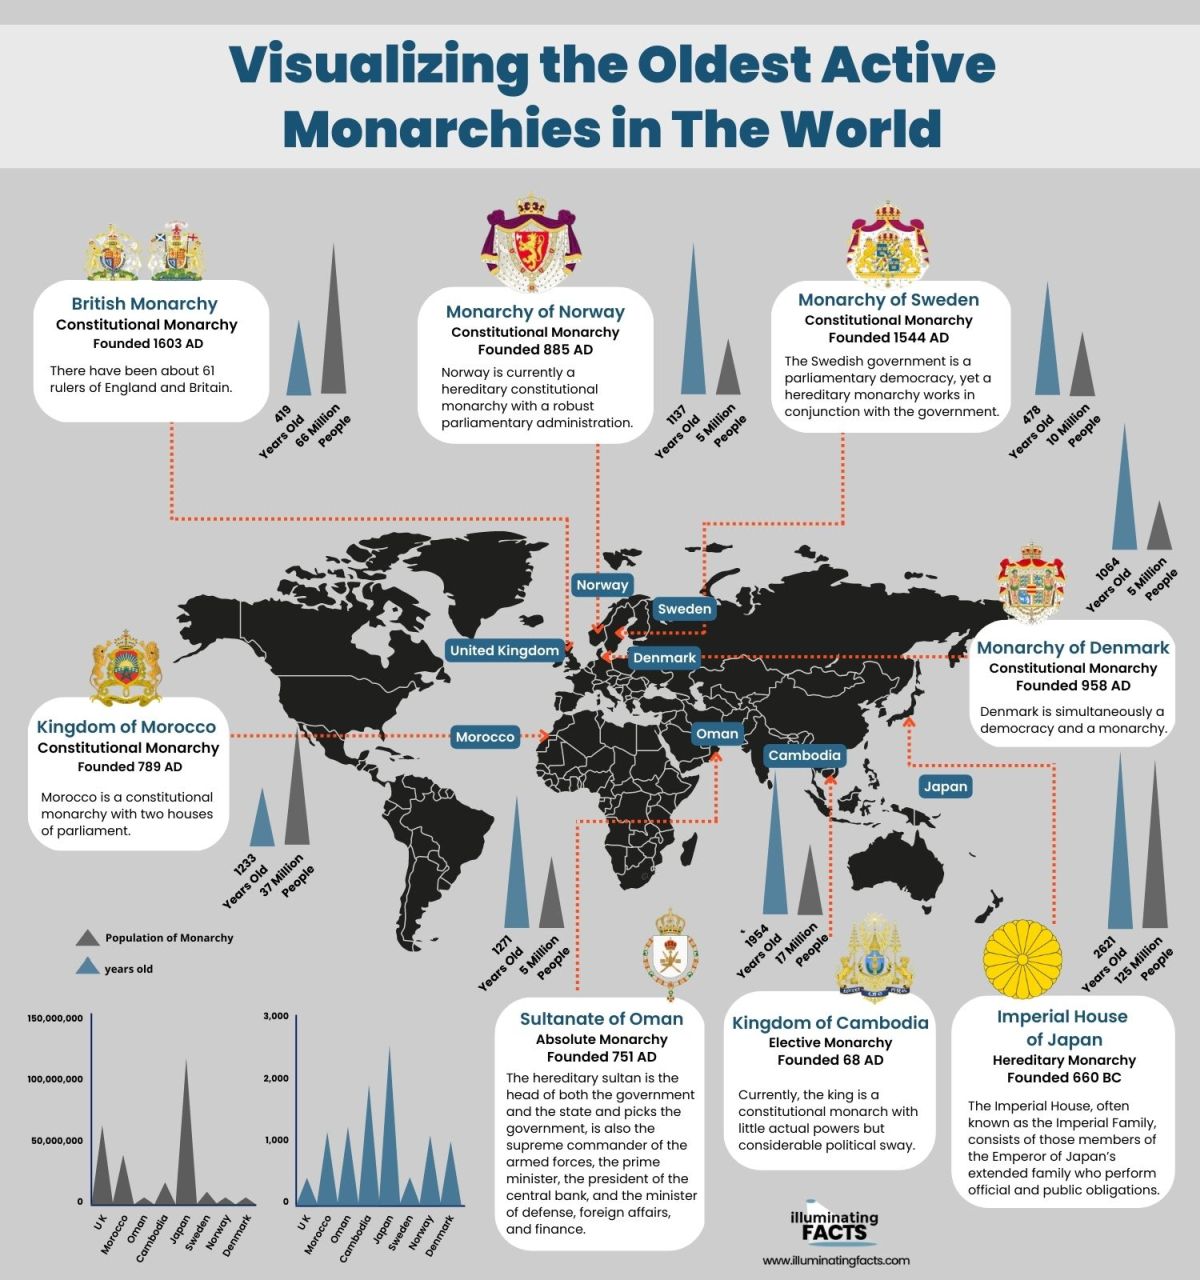 Visualizing the Oldest Active Monarchies in The World